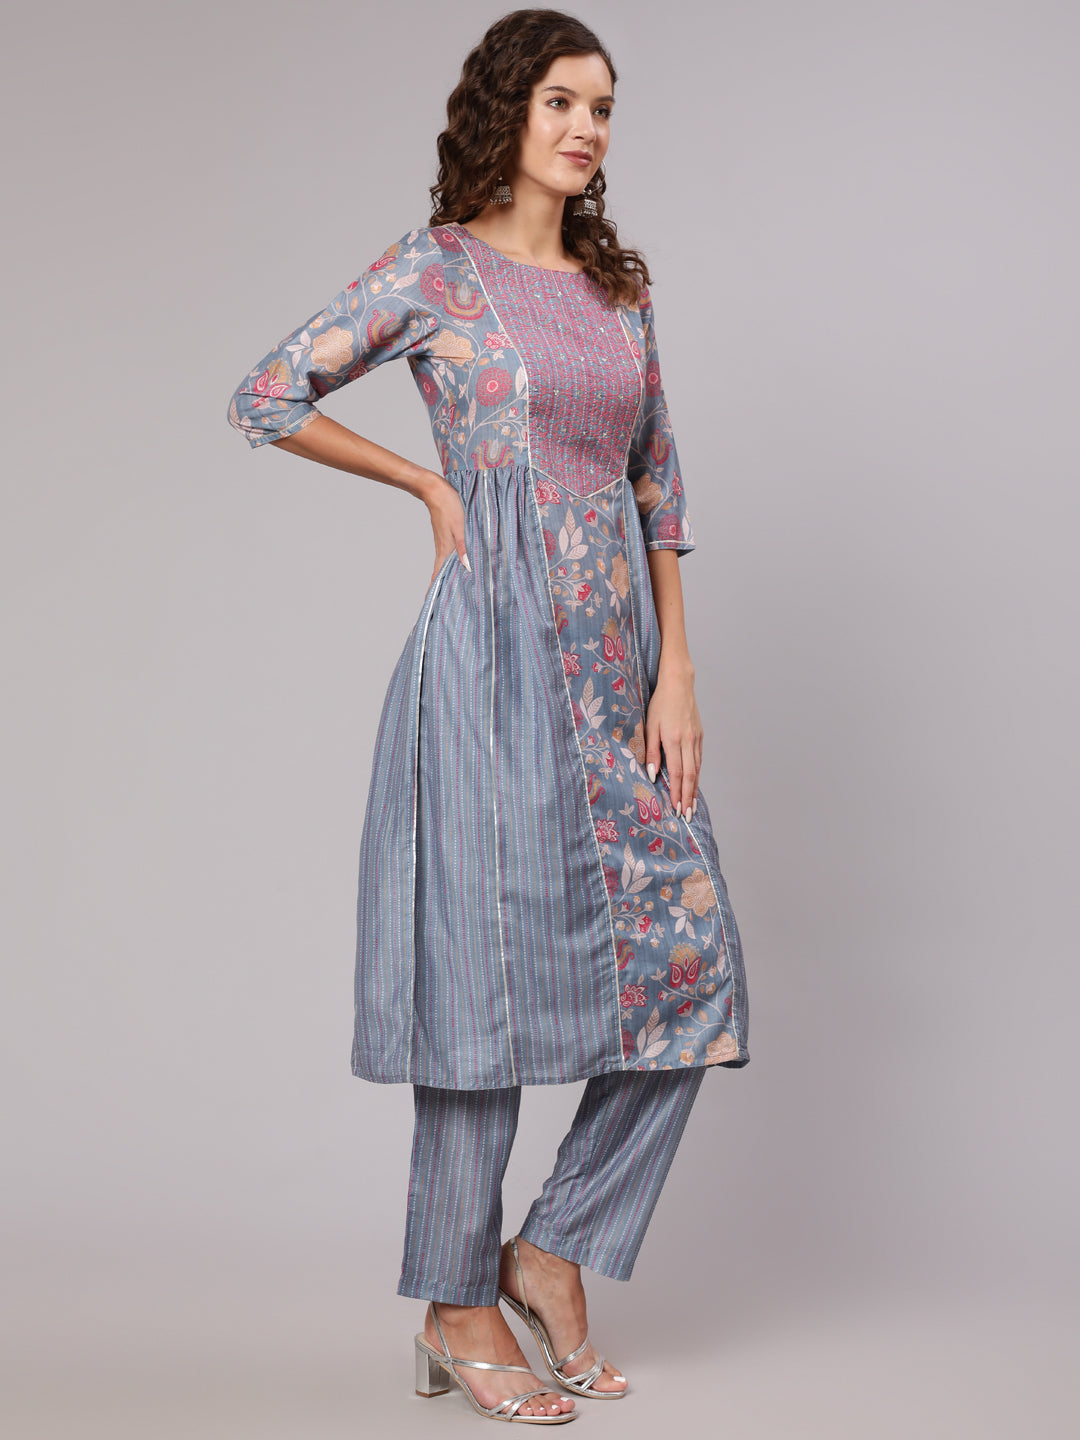 Shop Latest Collection Of Ethinc Wear For Women & Girls